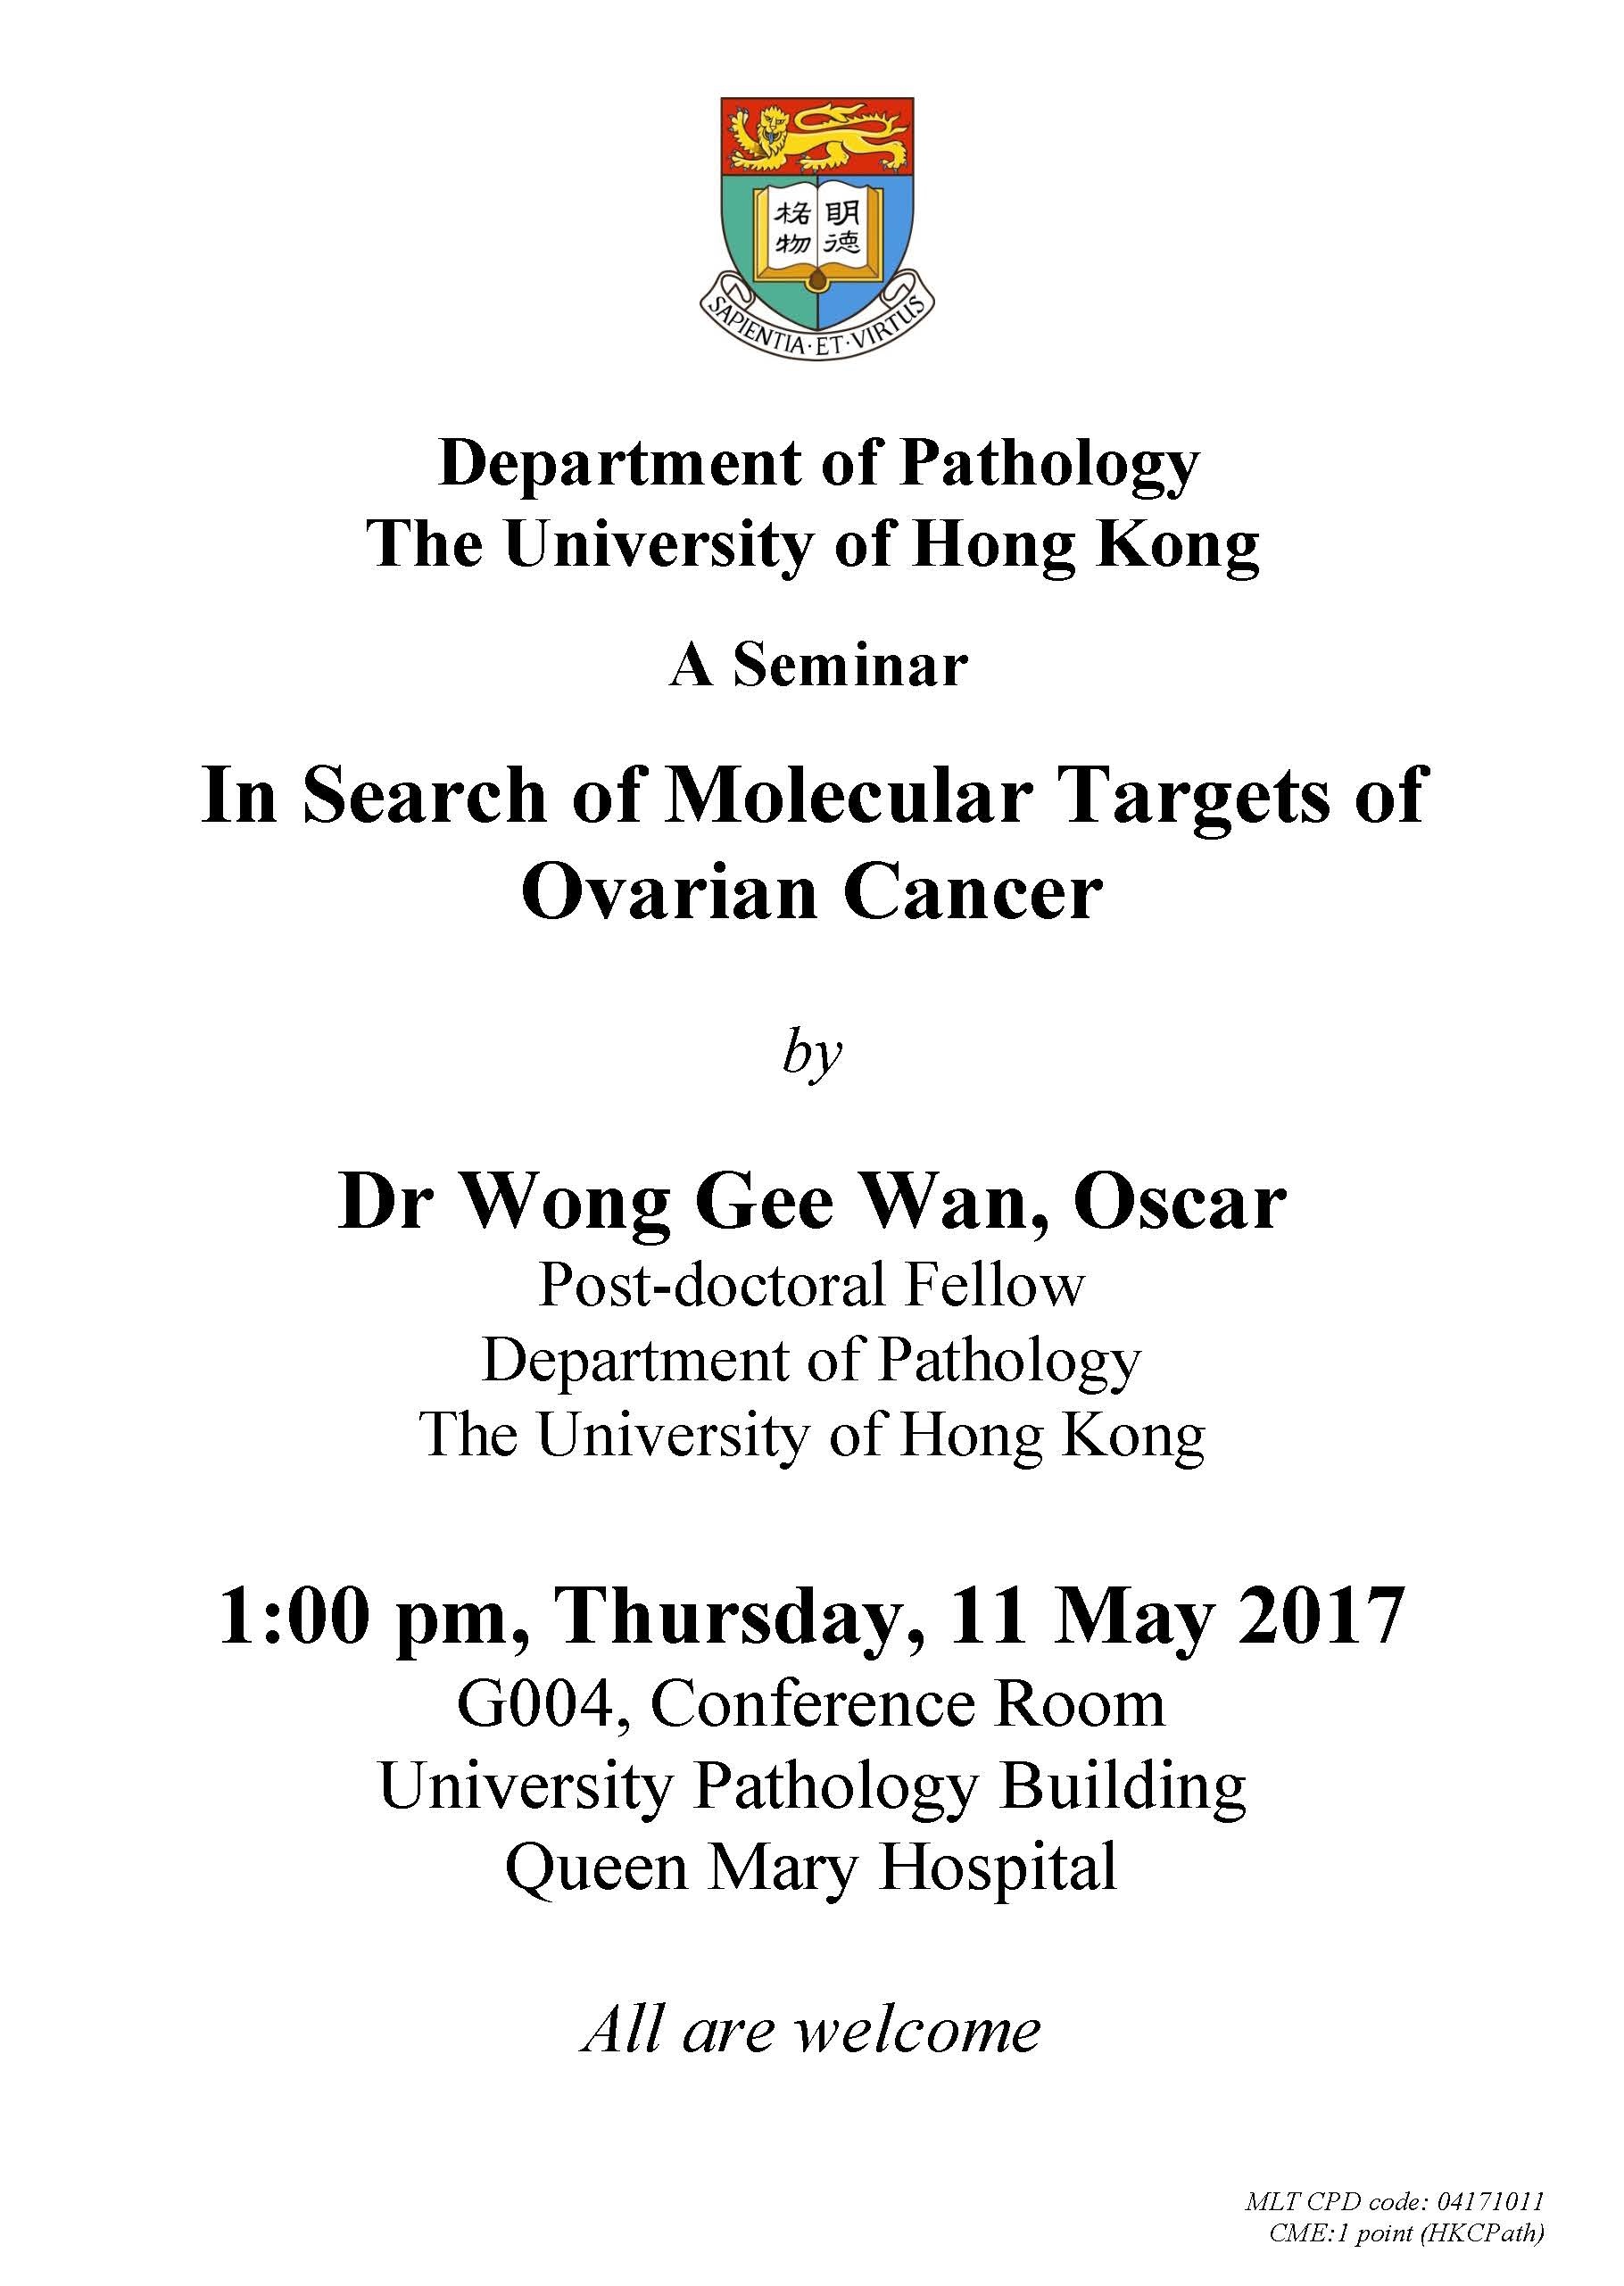 A Seminar In Search of Molecular Targets of Ovarian Cancer by  Dr Wong Gee Wan Oscar on May 11 (1 pm)